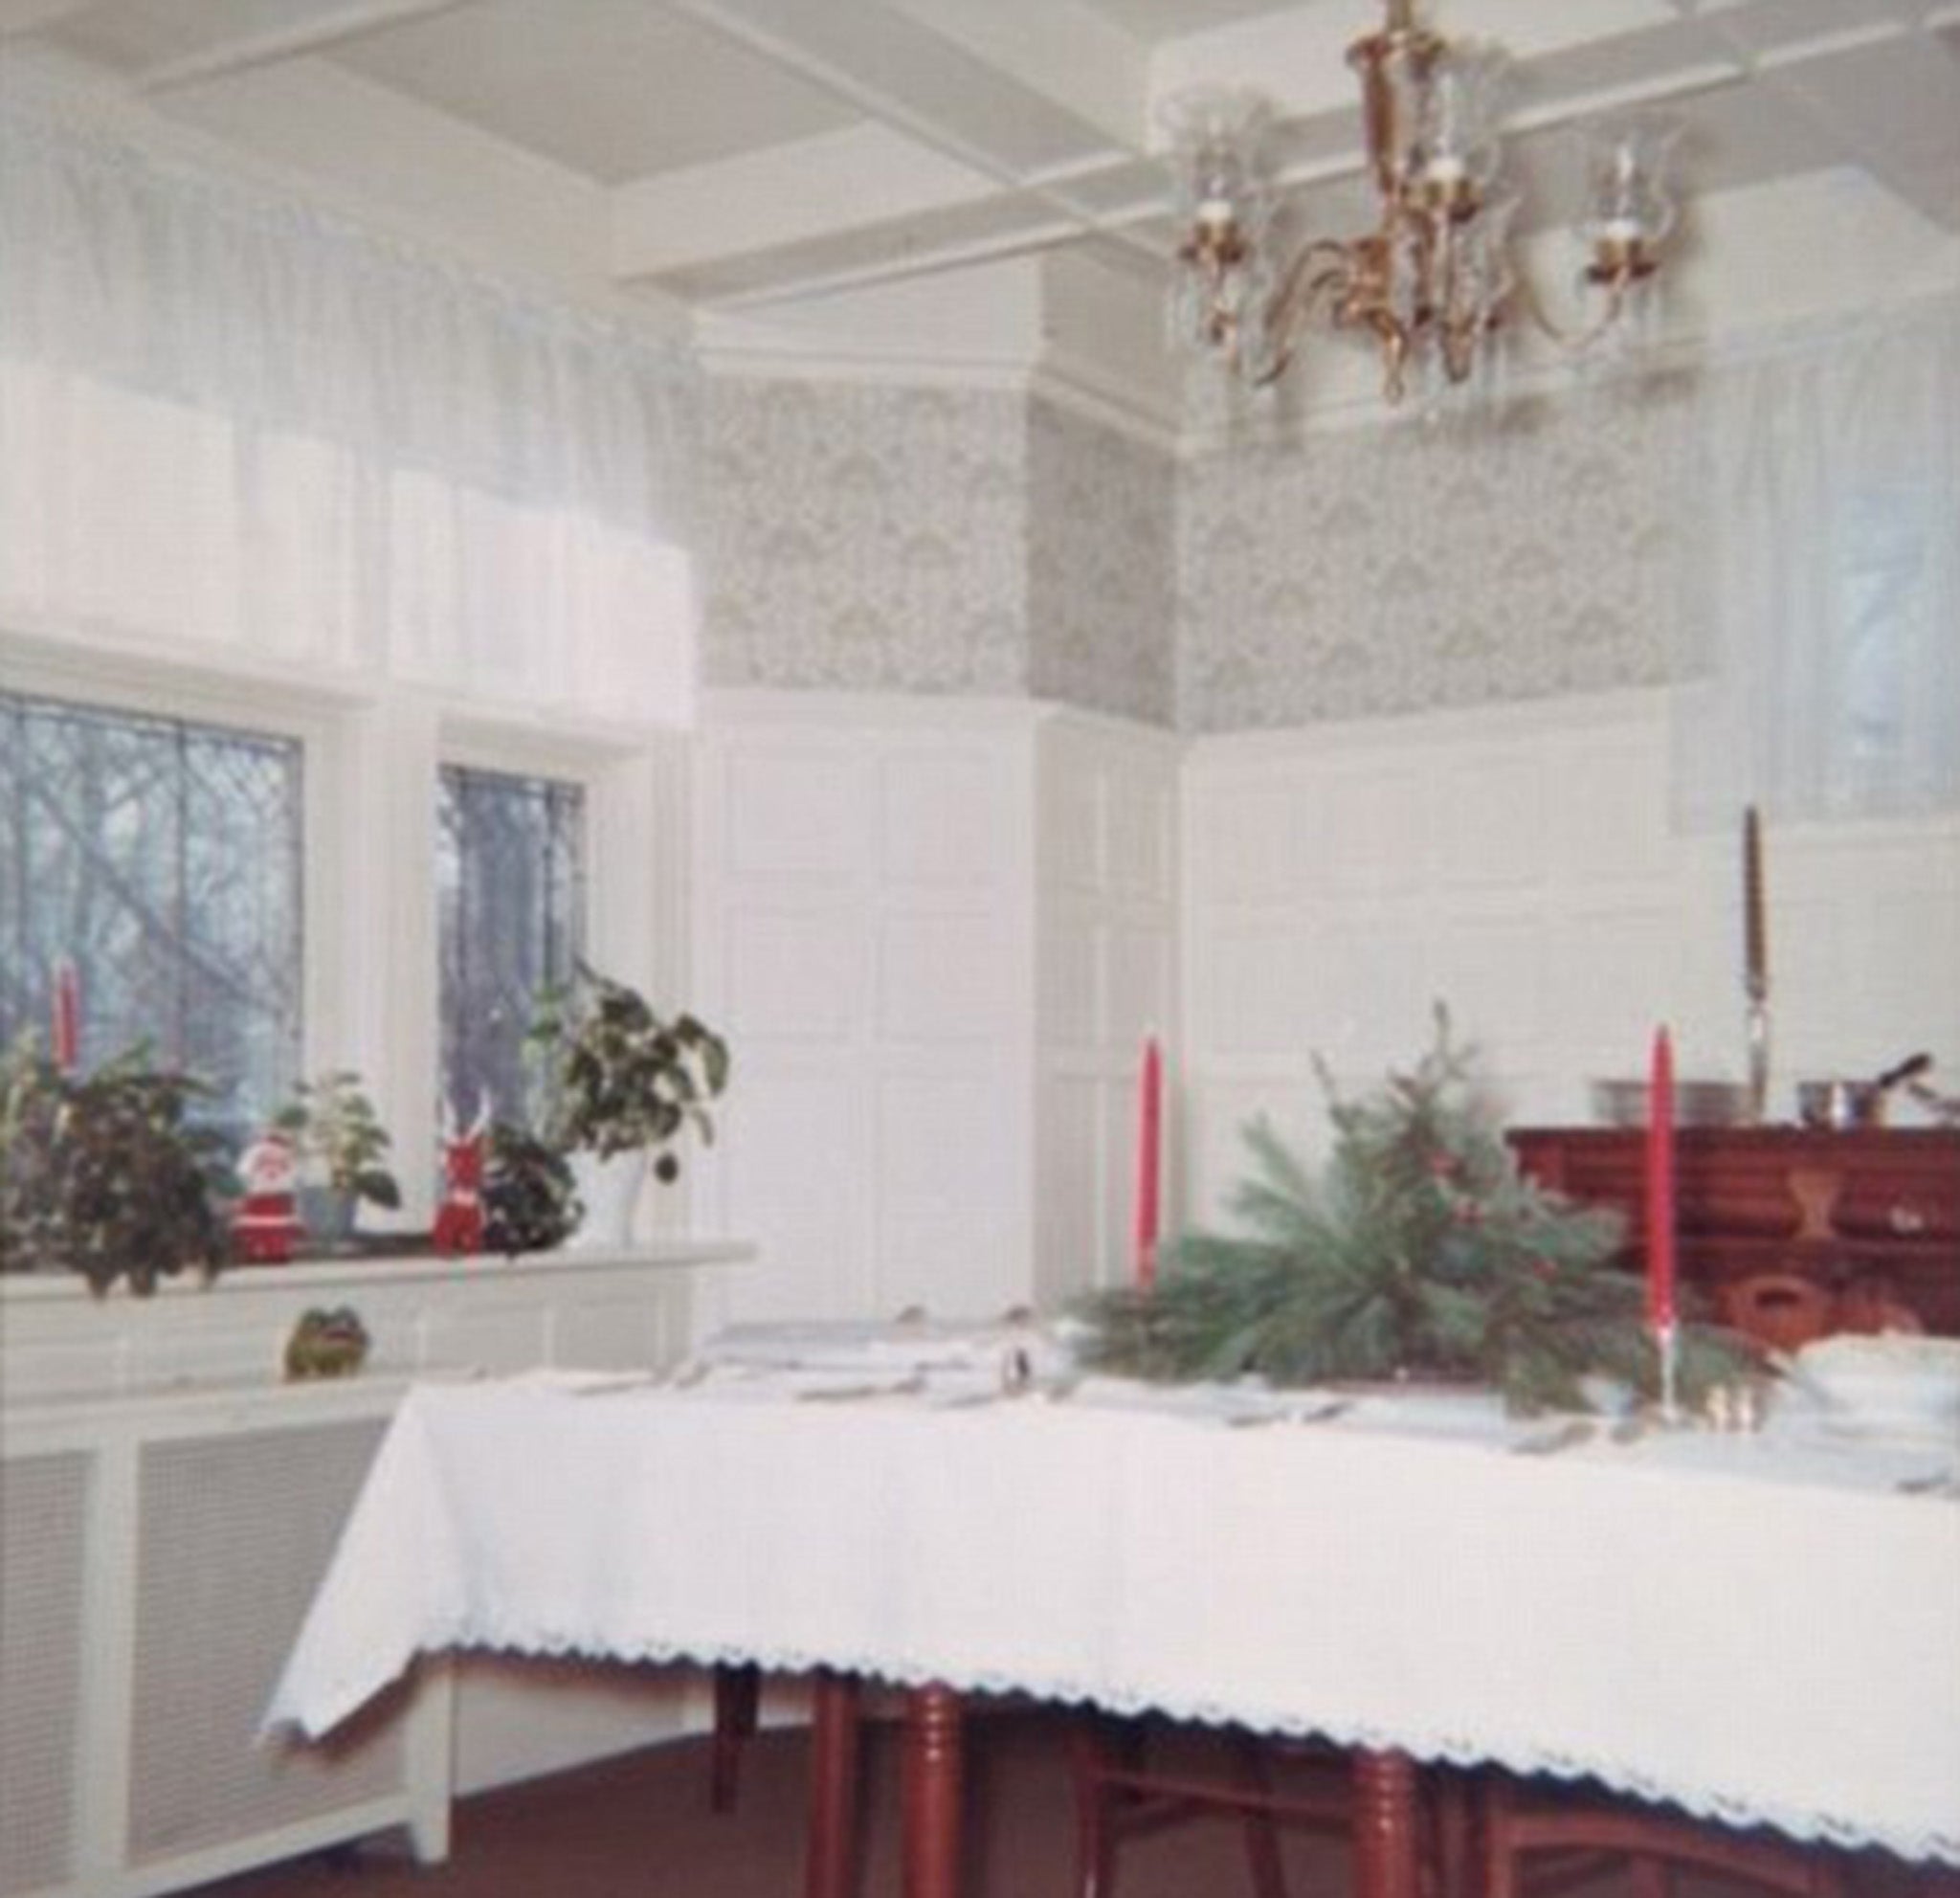 The stately home, which has six bedrooms, is nestled on a quite street about 28 miles from Manhattan; its high-ceilinged dining room is pictured in this Christmas photo taken by a previous owner